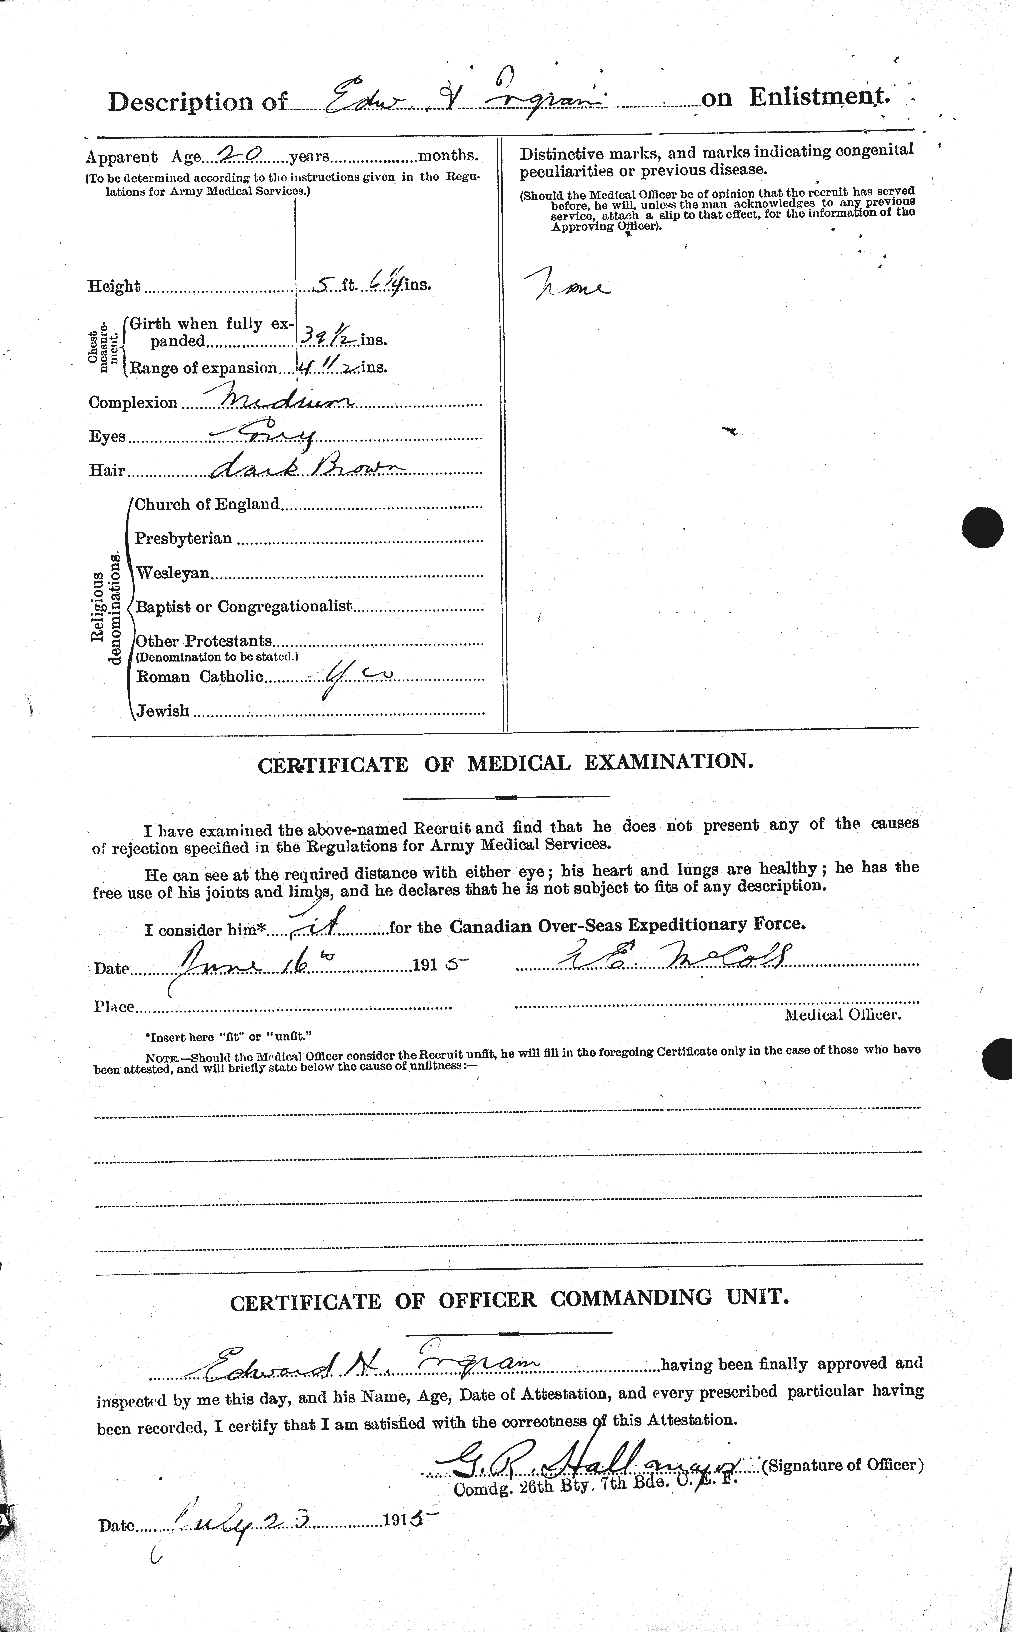 Personnel Records of the First World War - CEF 411121b